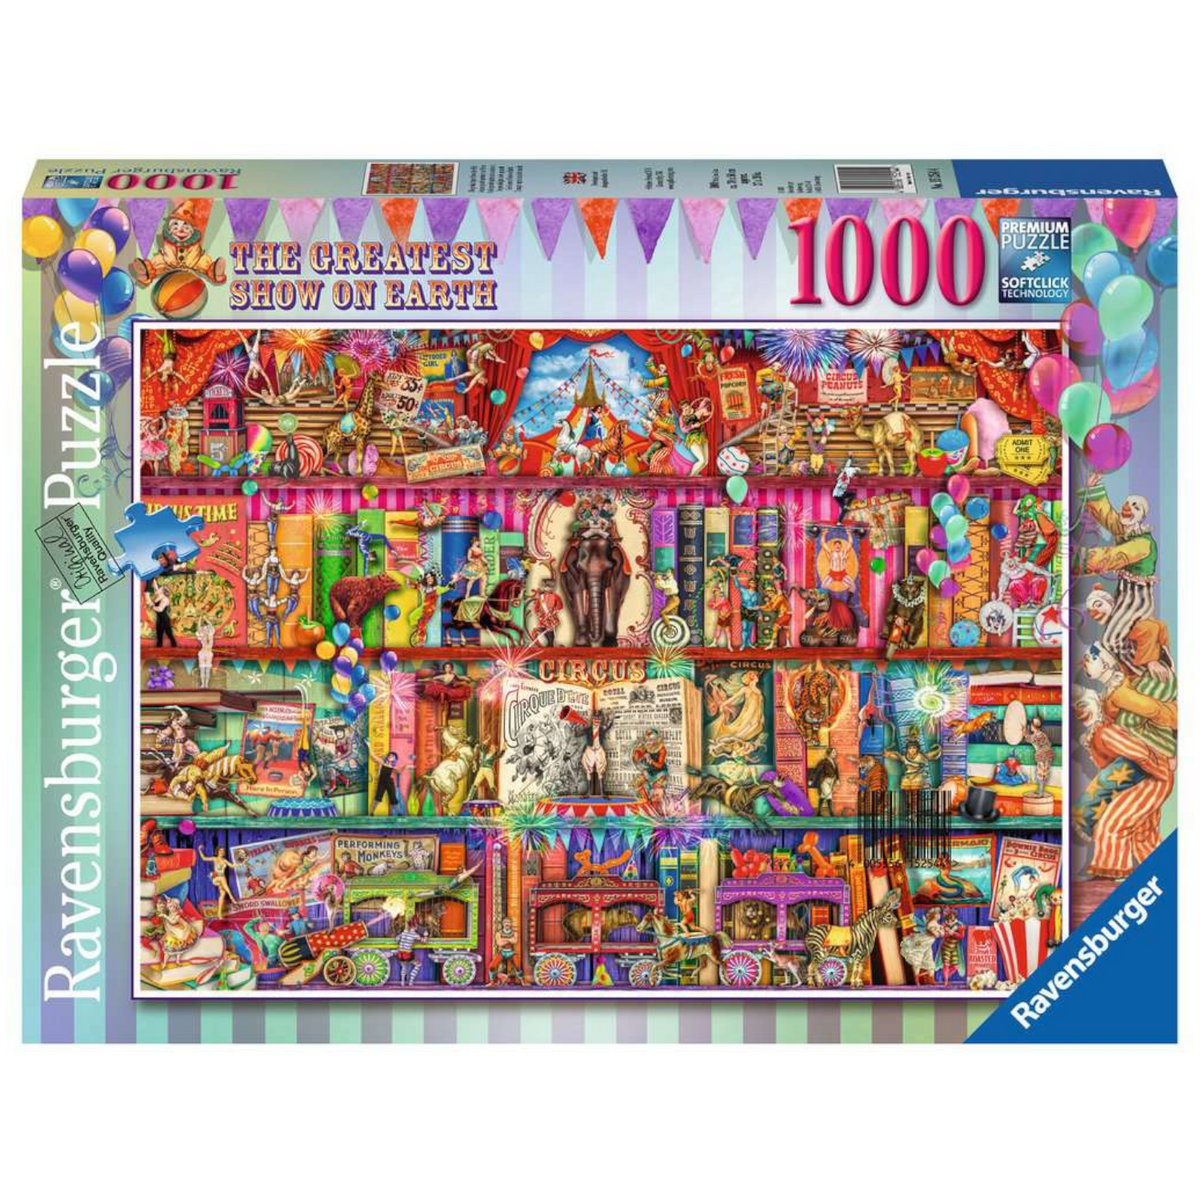 Ravensburger 16005 Tranquil Tigers 1500 Piece Puzzle for Adults - Every  Piece is Unique, Softclick Technology Means Pieces Fit Together Perfectly